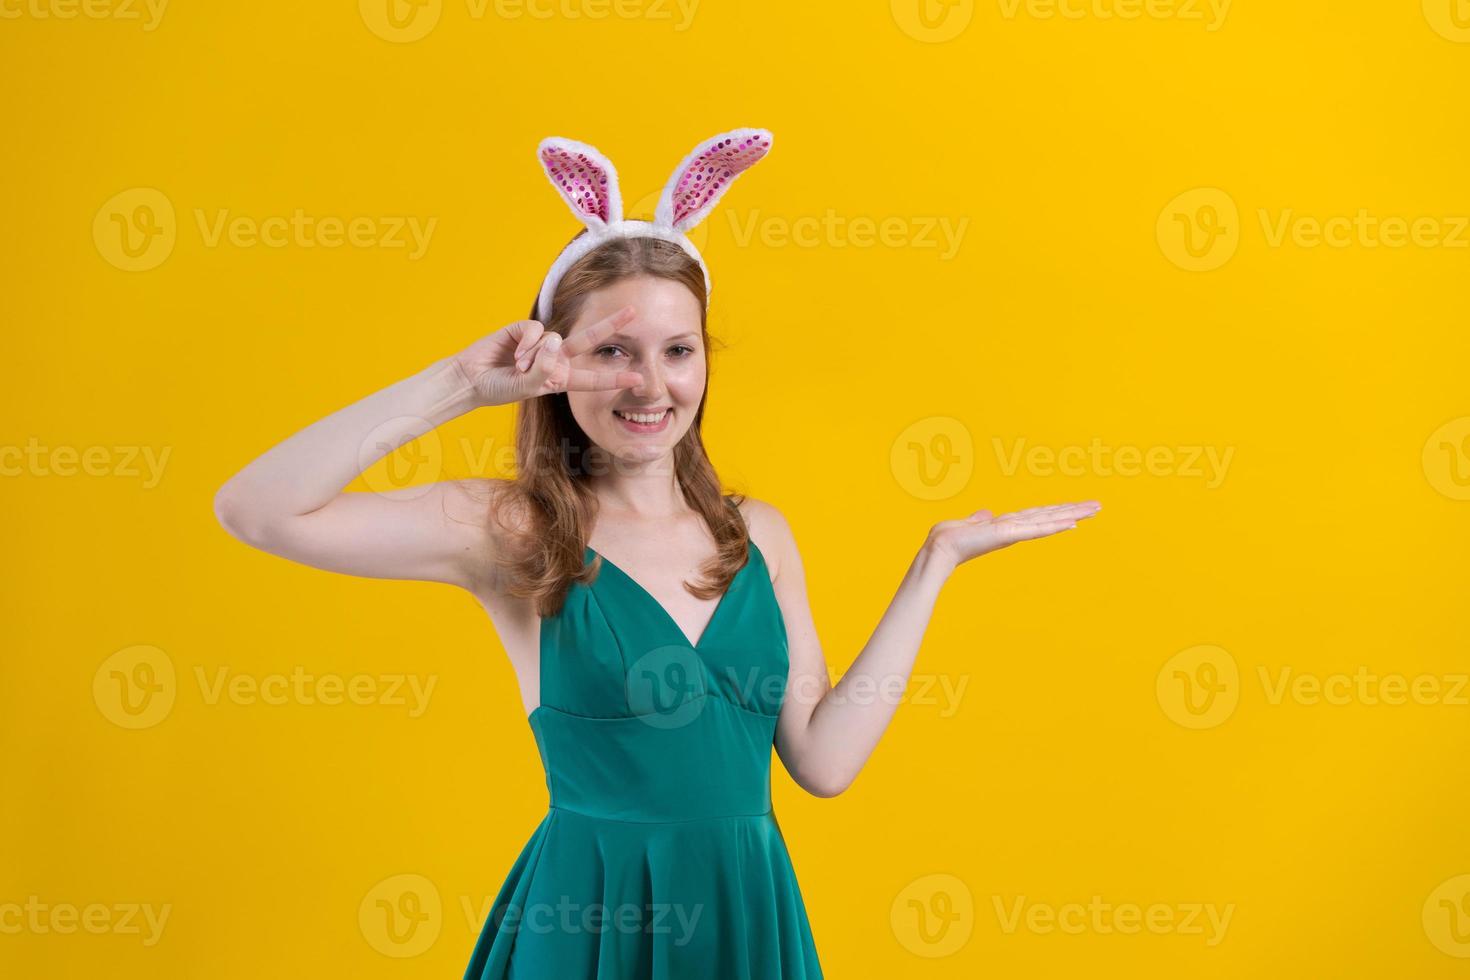 Young woman with bunny ears for easter holidays presenting an idea smiling photo